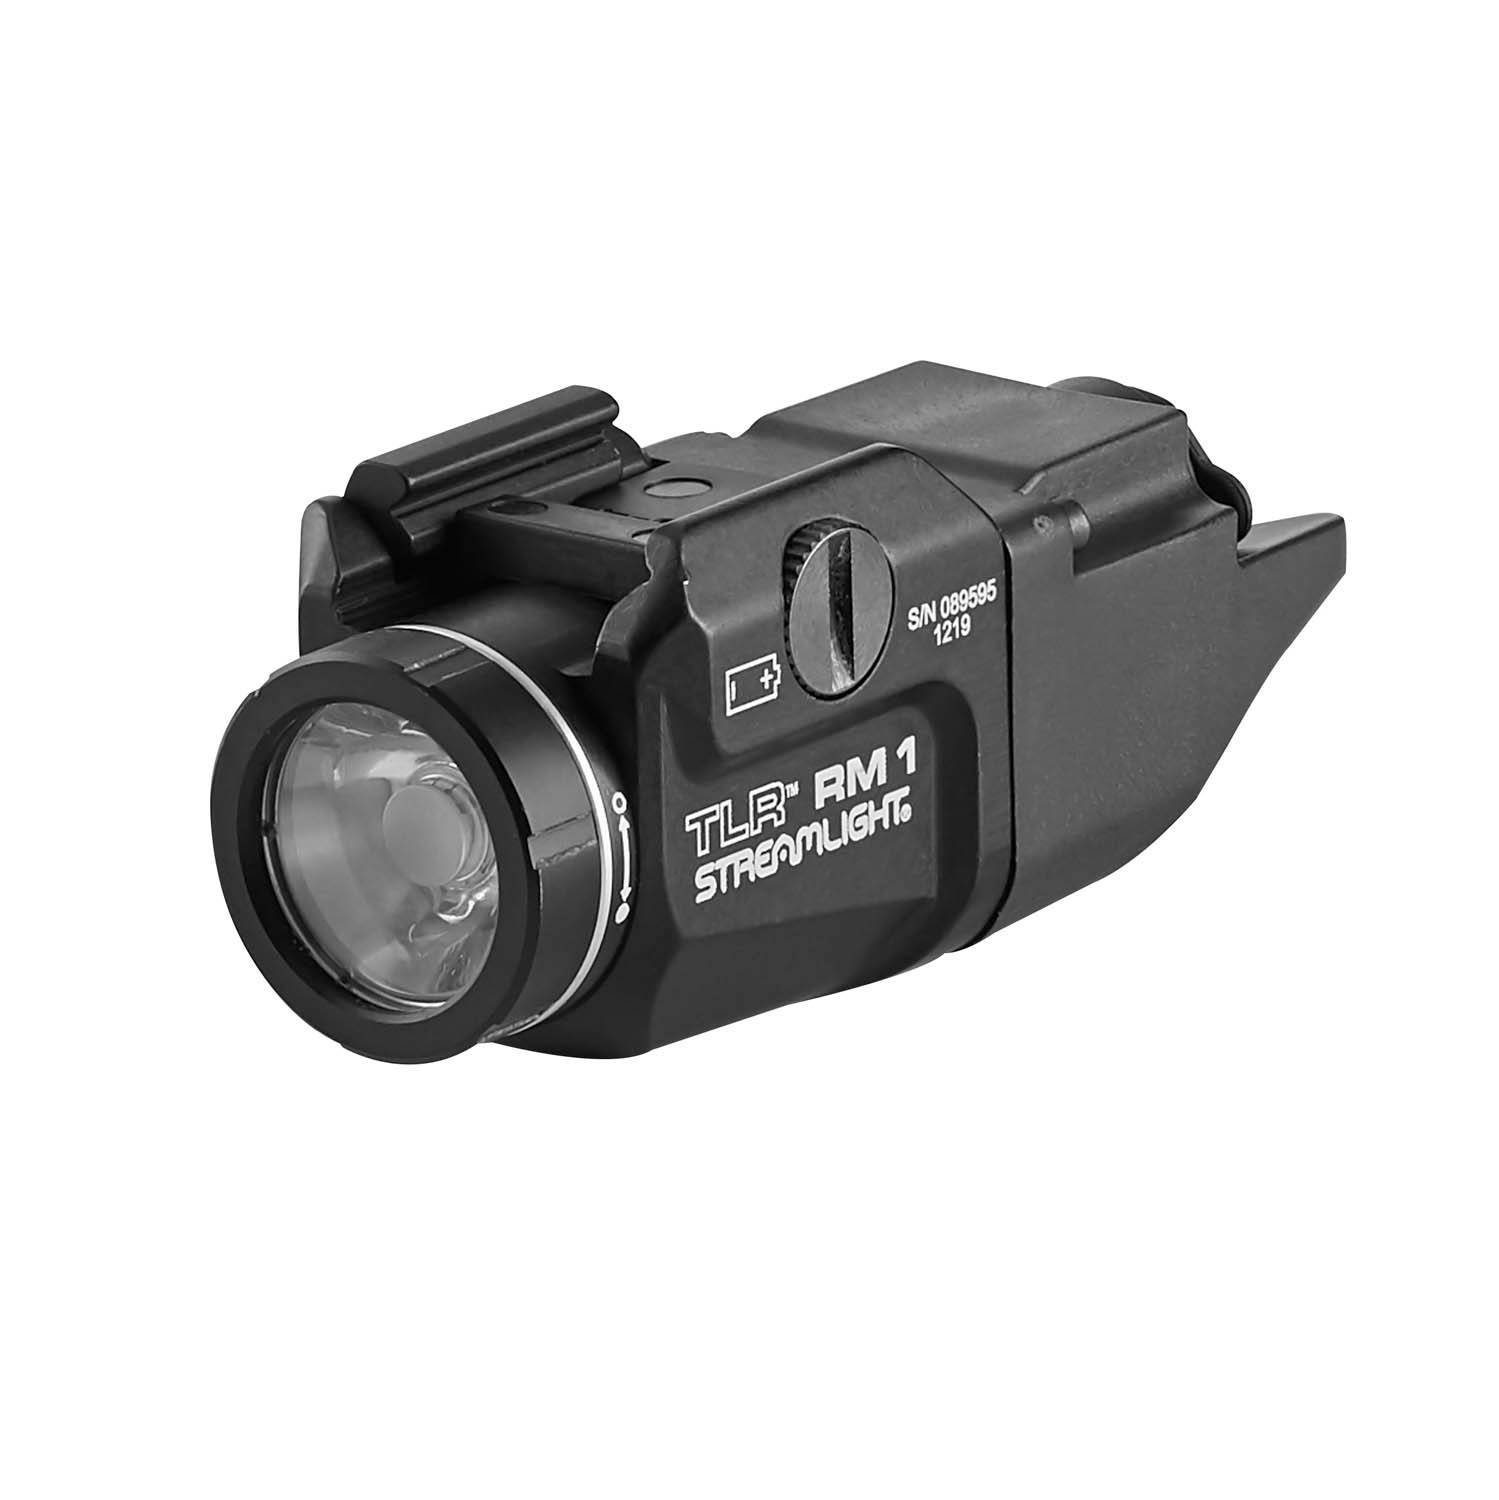 Streamlight TLR RM 1 Compact Mounted Tactical Light